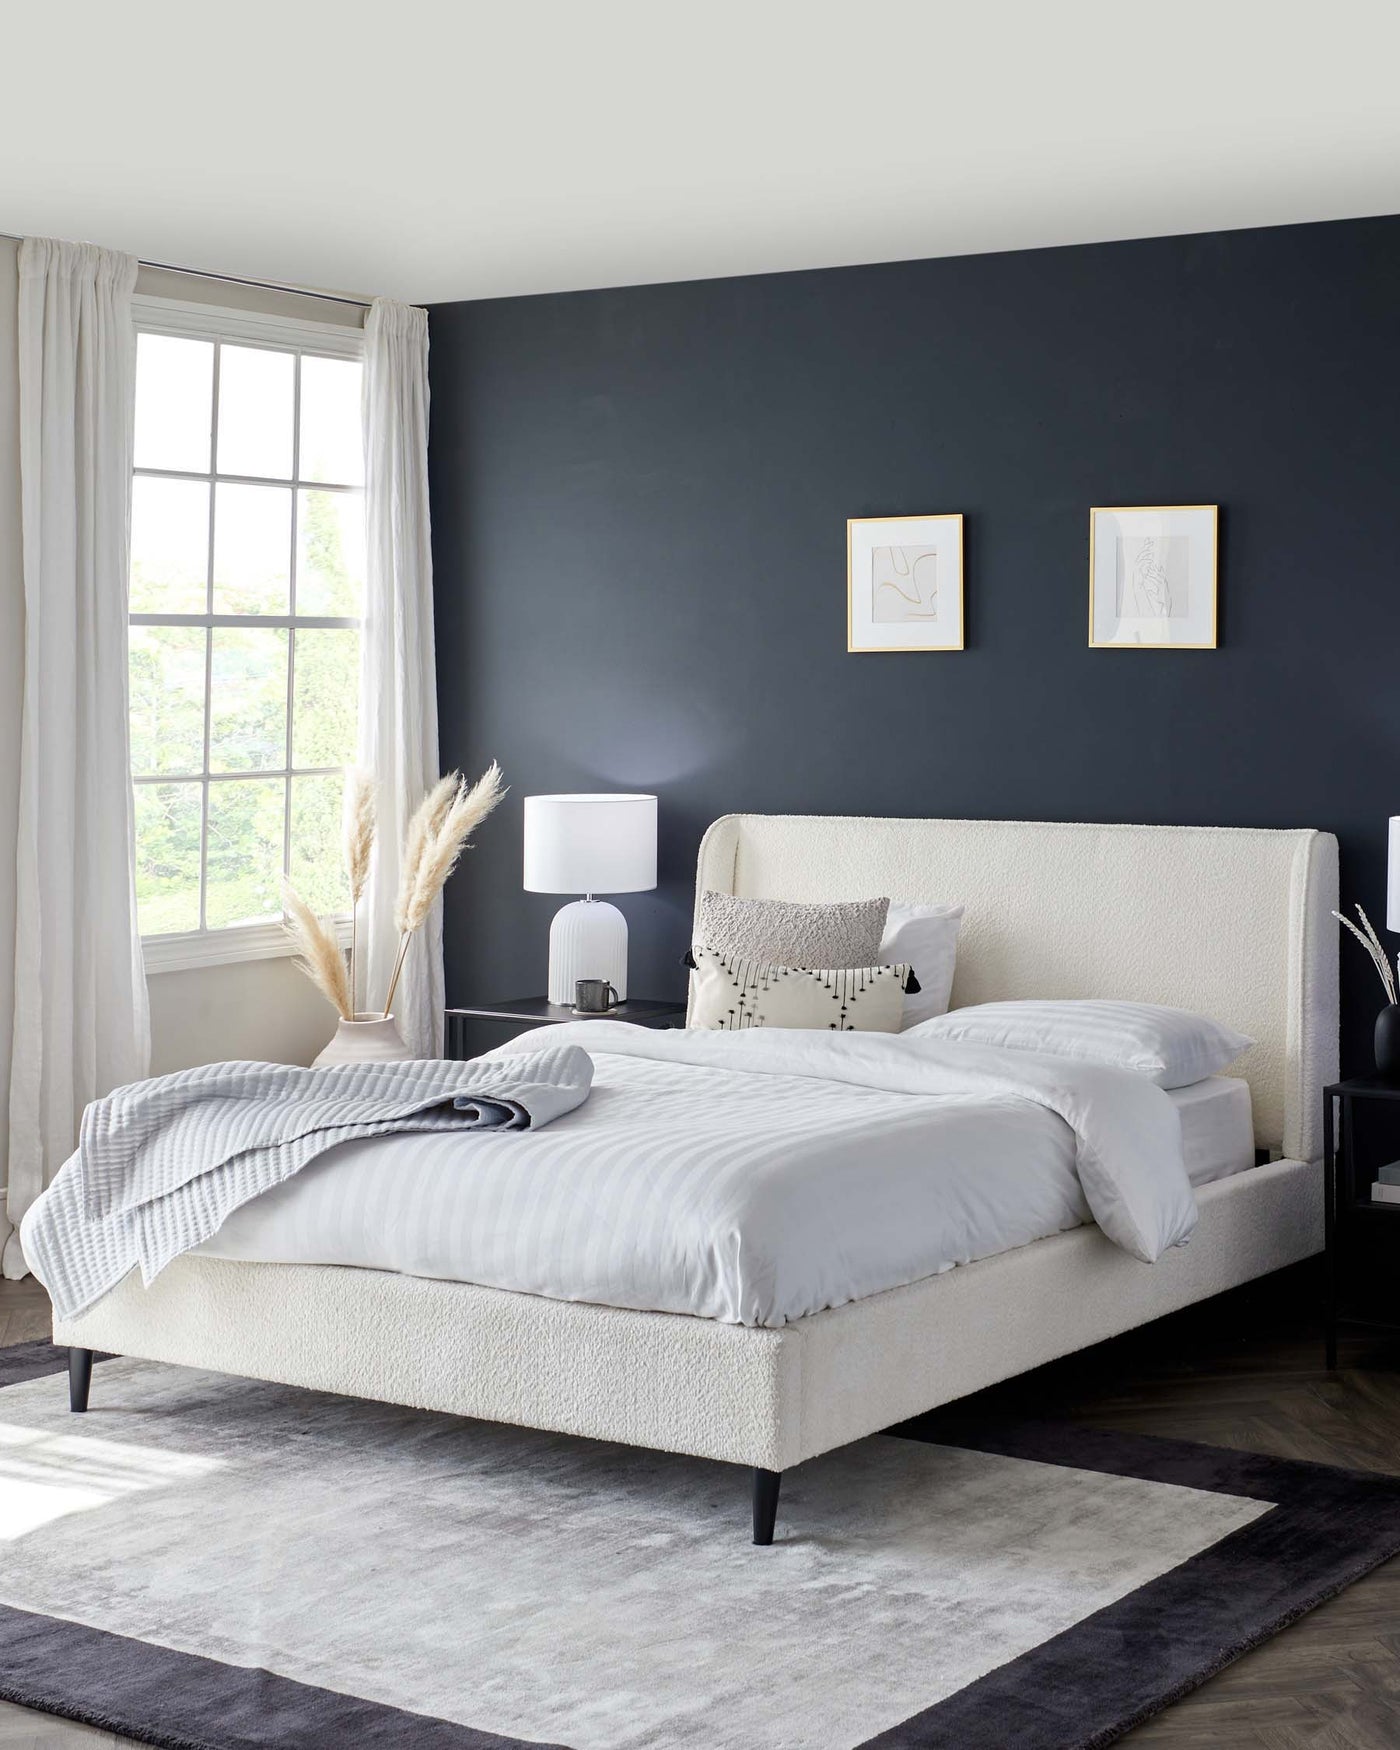 Elegant bedroom featuring a plush, upholstered cream bed frame with a high headboard, accompanied by two sleek black nightstands with clean lines and white table lamps. The bed is dressed in white bedding with minimalist pillows. A large grey and black area rug underlays the bed and nightstands, complementing the modern aesthetic of the room.